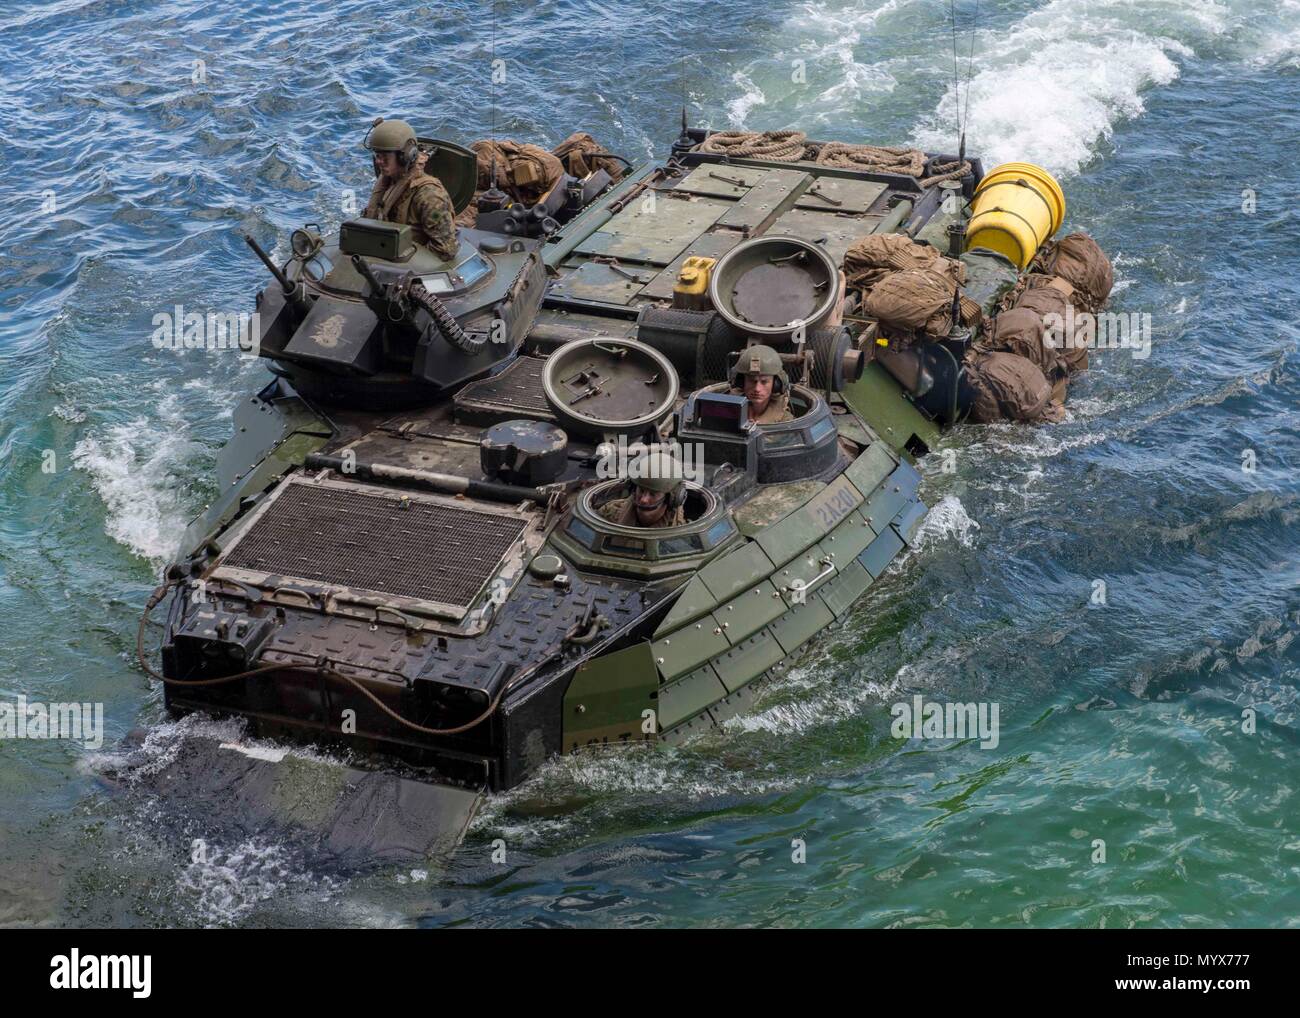 180606-N-PC620-283  BALTIC SEA (June 6, 2018) An AAV-P7/A1 assault amphibious vehicle, attached to the 26th Marine Expeditionary Unit, enters the well deck of the Harpers Ferry-class dock landing ship USS Oak Hill (LSD 51) during exercise Baltic Operations (BALTOPS) 2018, June 6. BALTOPS is the premier annual maritime-focused exercise in the Baltic region and one of the largest exercises in Northern Europe enhancing flexibility and interoperability among allied and partner nations. (U.S. Navy photo by Mass Communication Specialist 3rd Class Michael H. Lehman/Released) Stock Photo